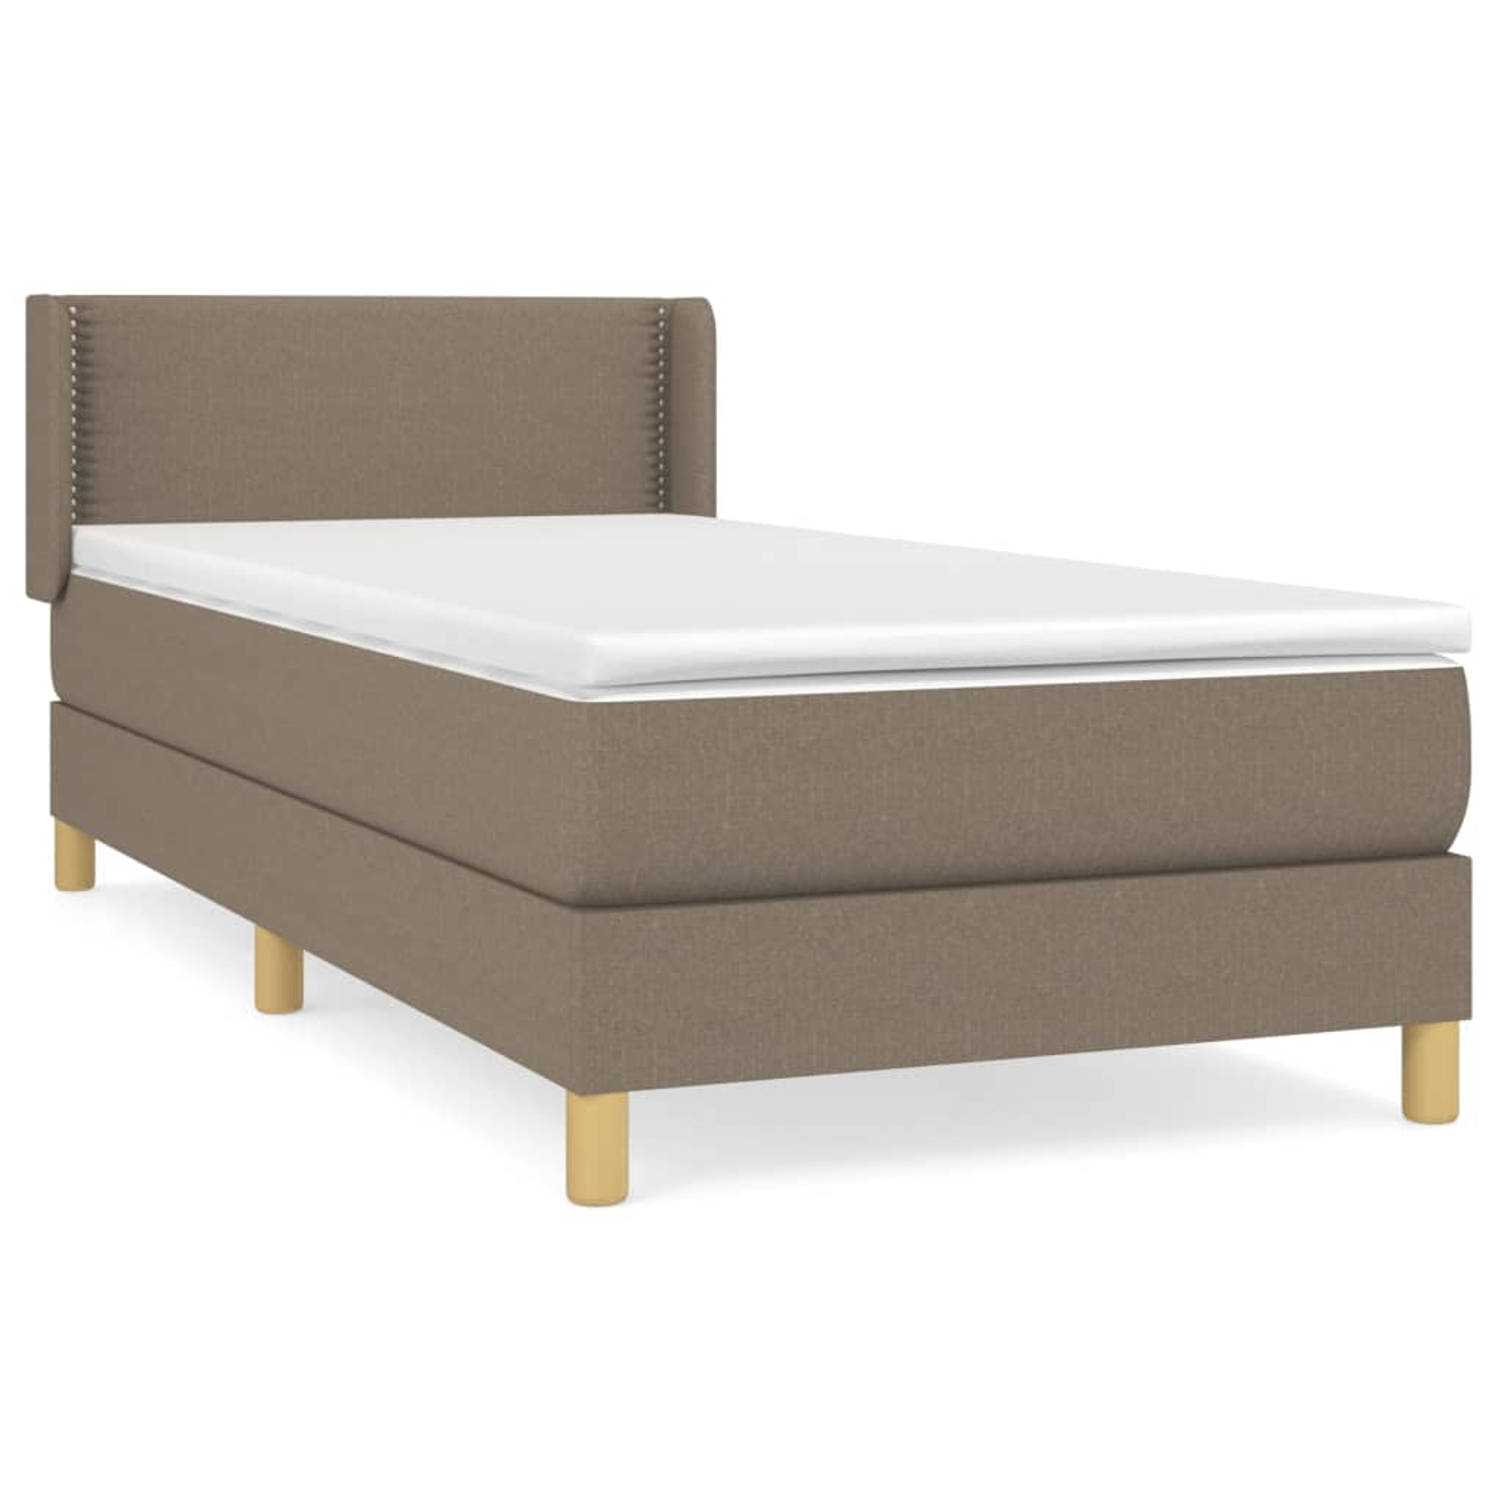 The Living Store Boxspringbed - Comfort - Bed - 193 x 93 x 78/88 cm - Taupe